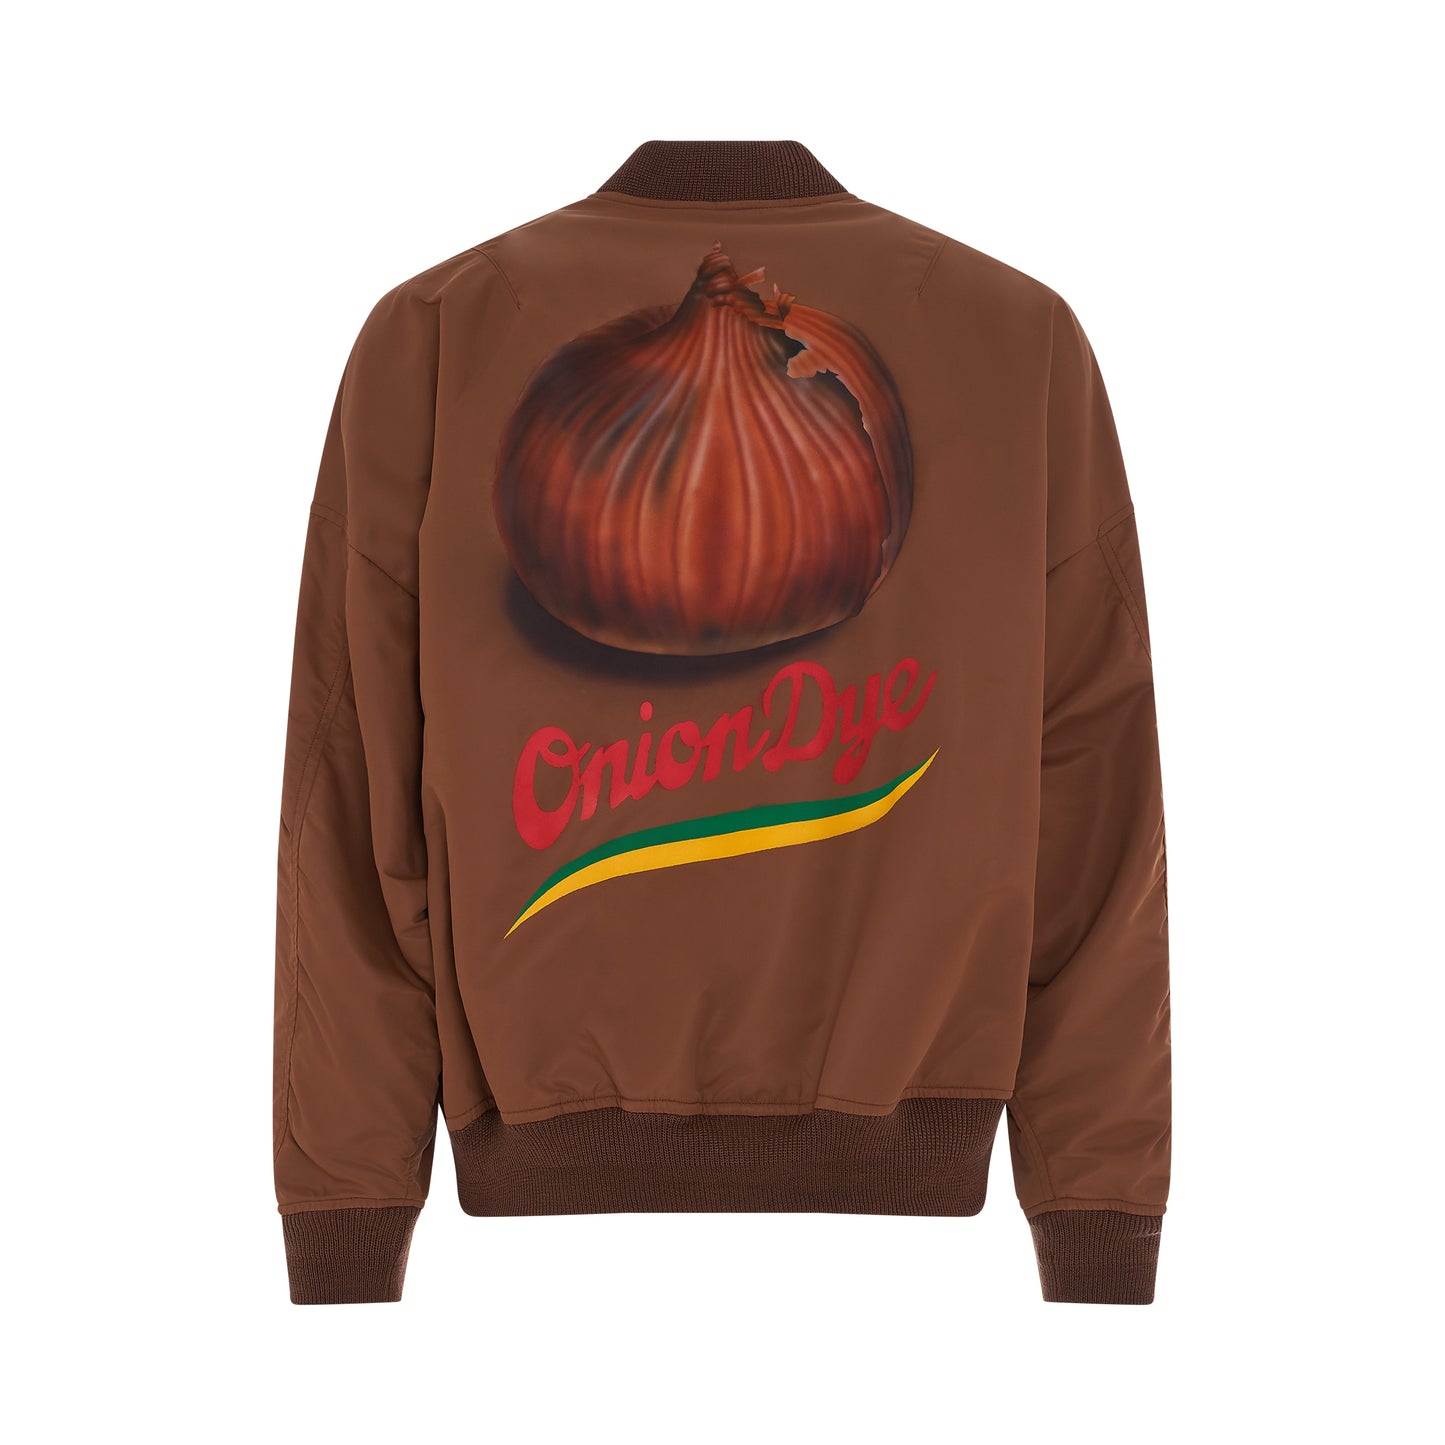 Vegetable Dyed MA-1 Bomber Jacket in Onion